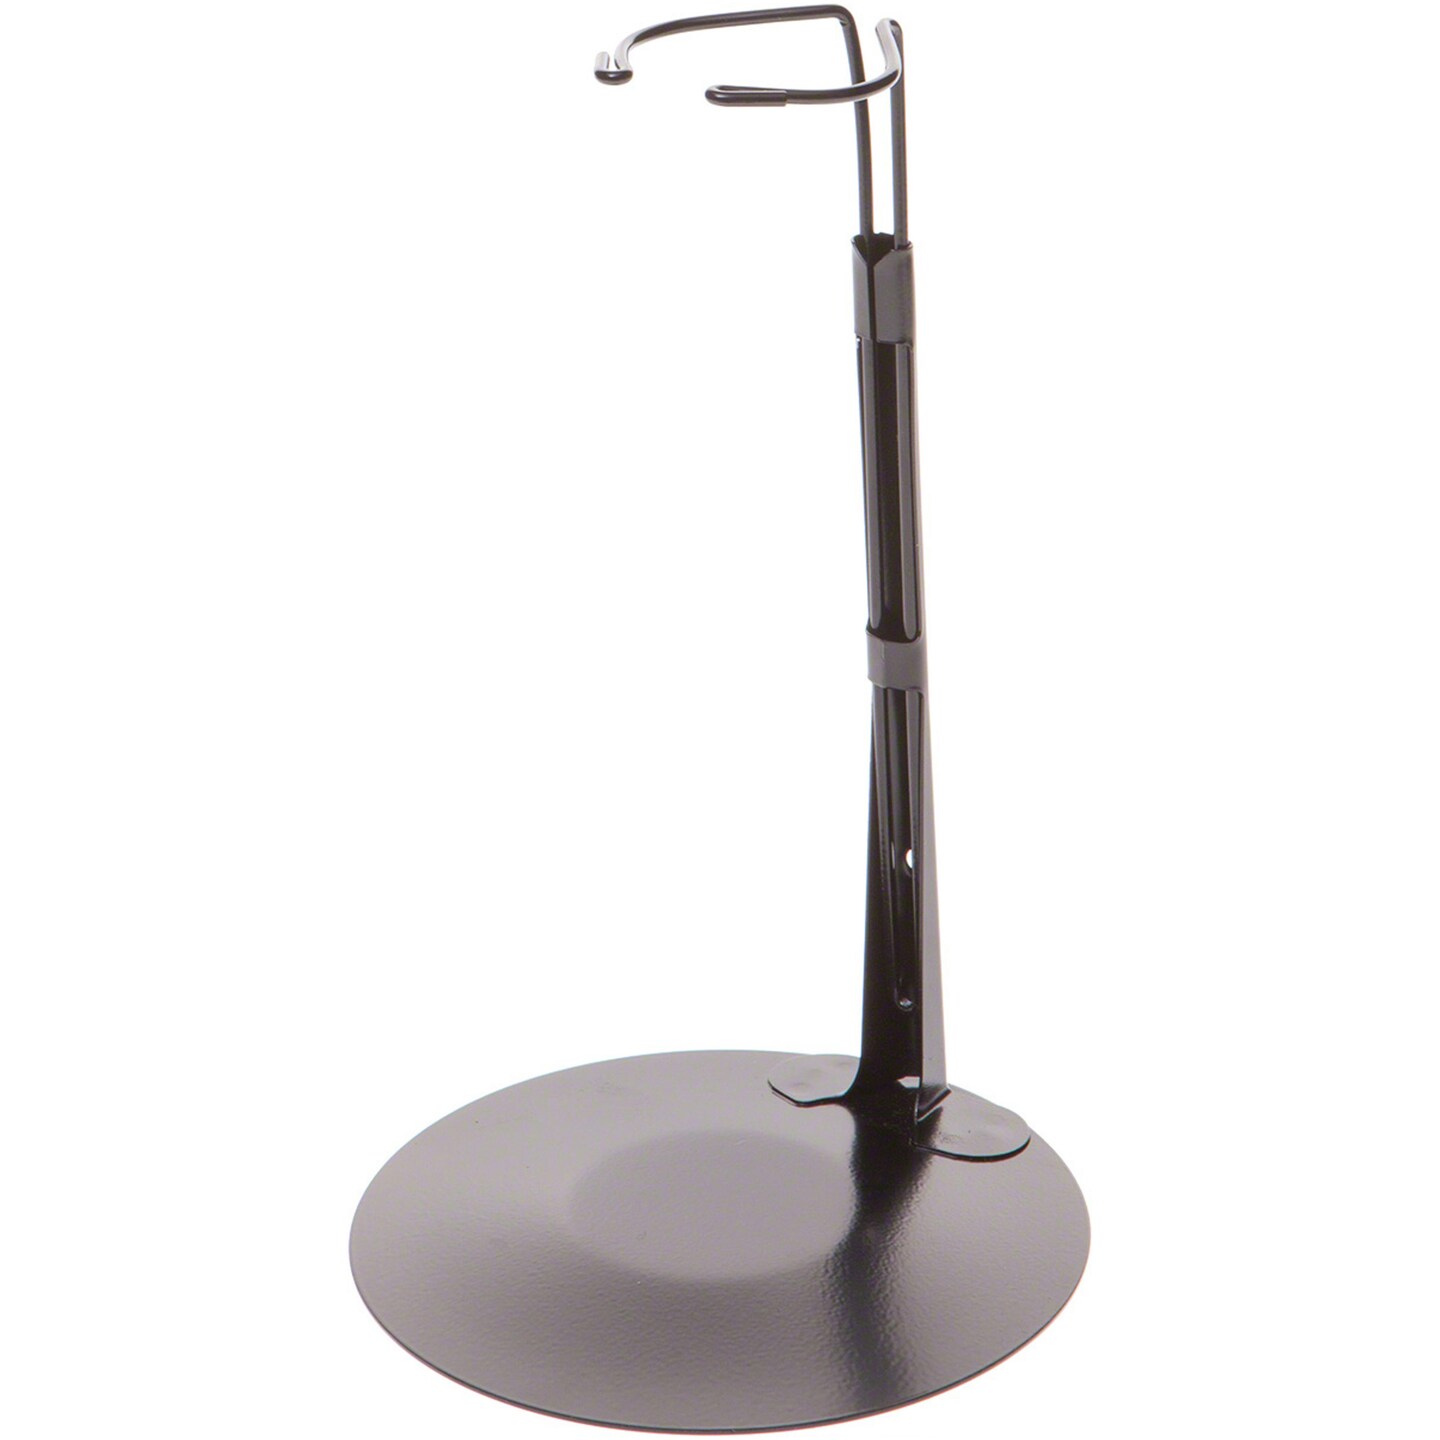 Kaiser 3075 Black Adjustable Doll Stand, fits 16 to 22 inch Dolls, waist width adjusts from 2 to 2.5 inches